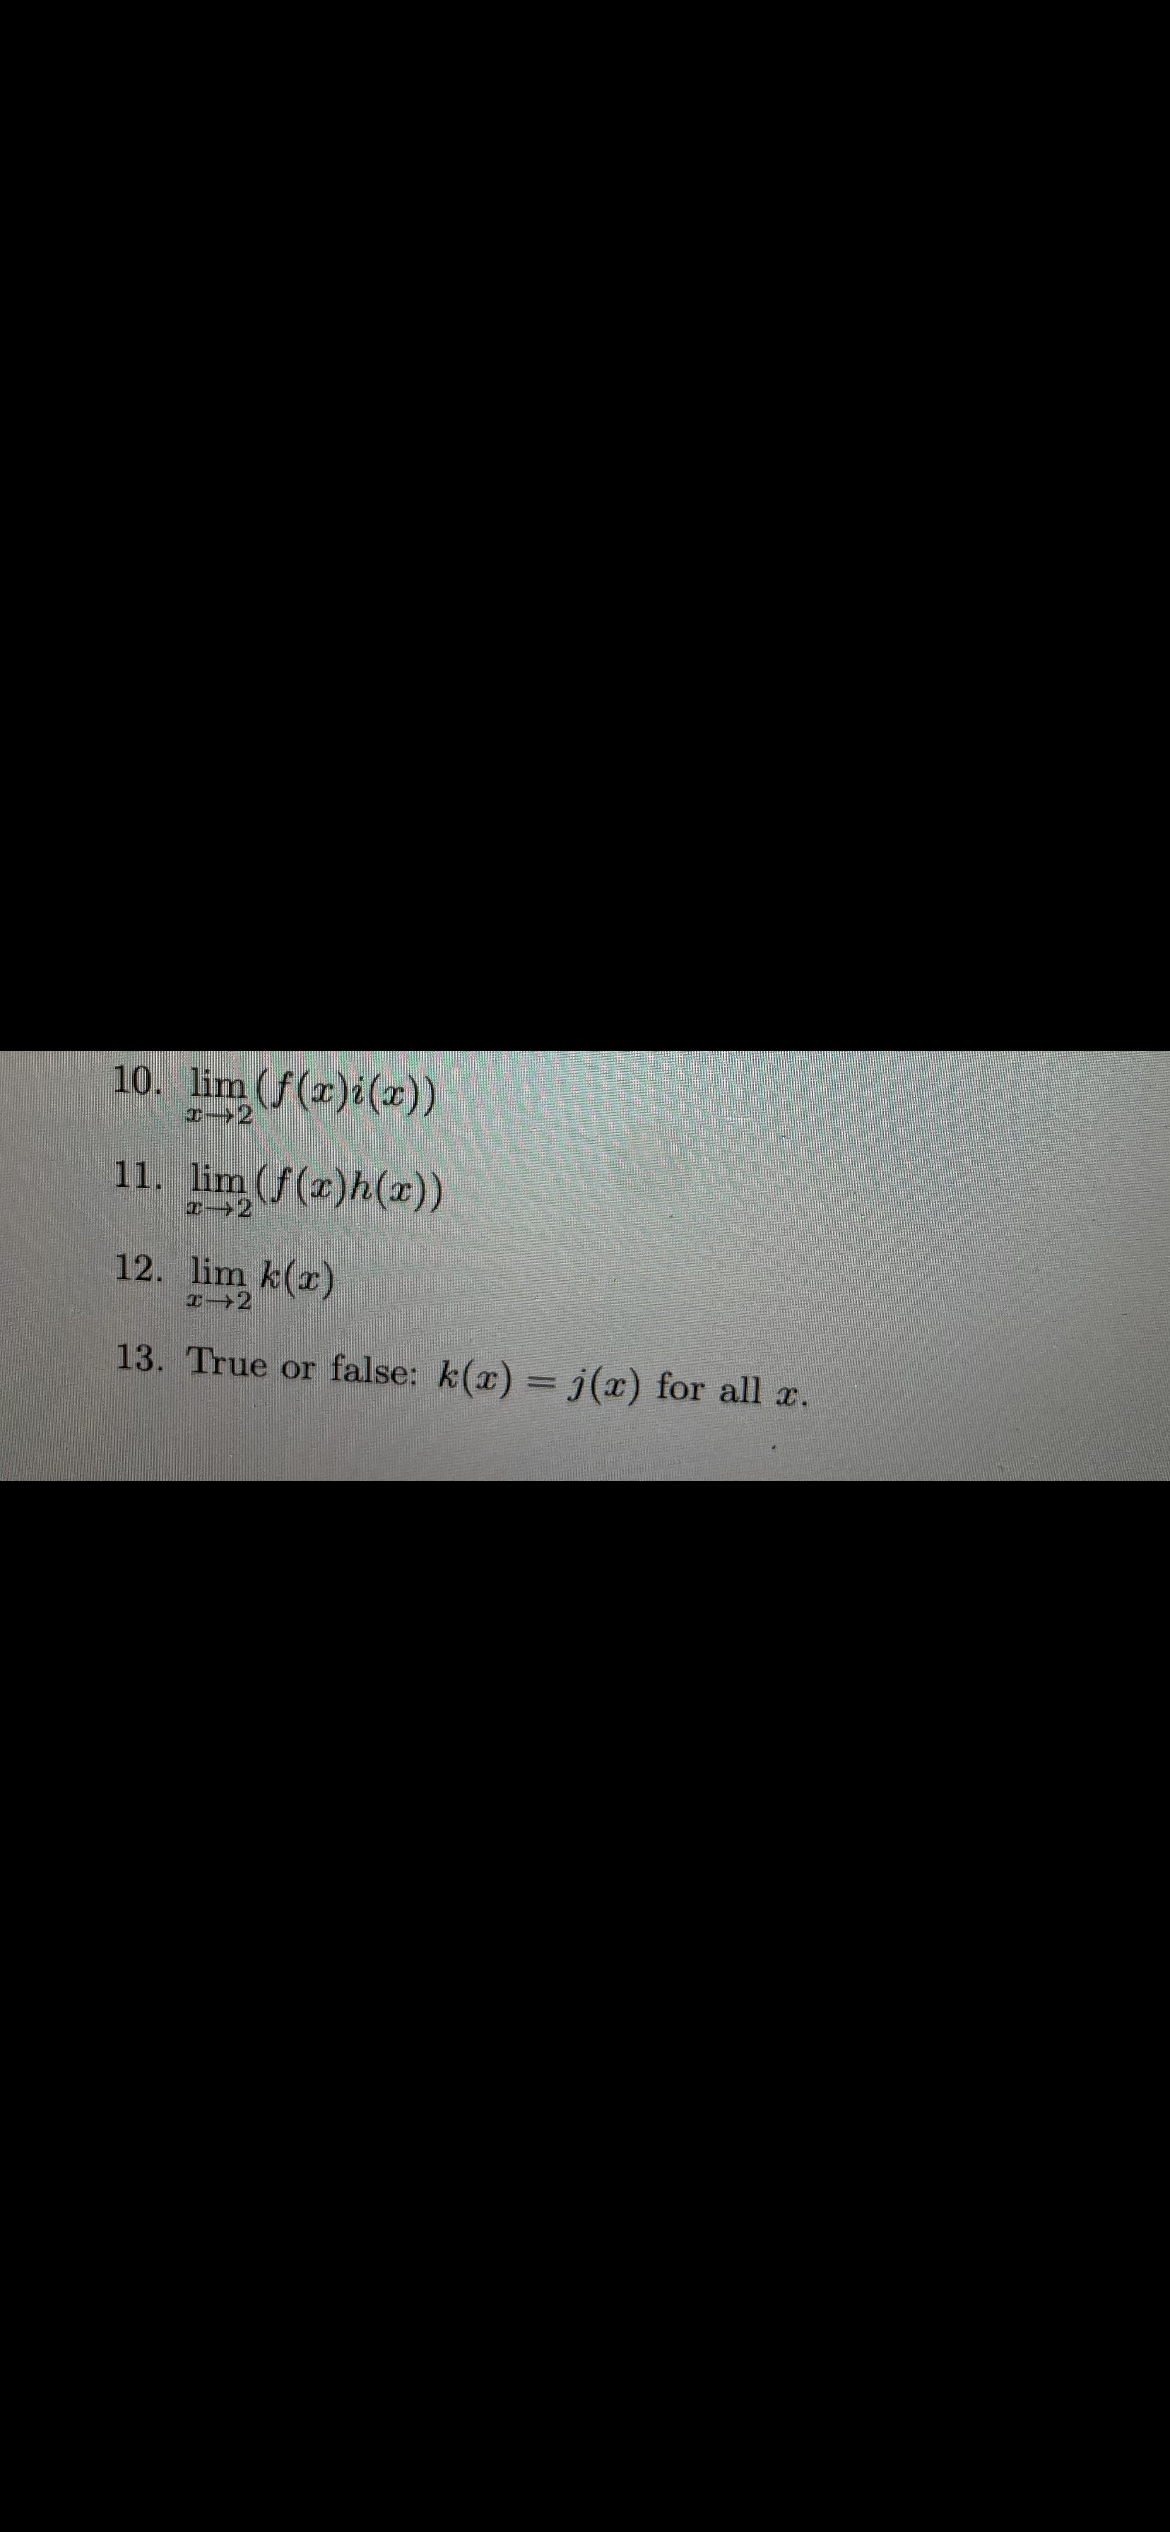 10. lim (f(x)i(x))
11. lim (f(x)h(r))
は→2
12. lim k(r)
エ→2
13. True or false: k(x) = j(x) for all a.
